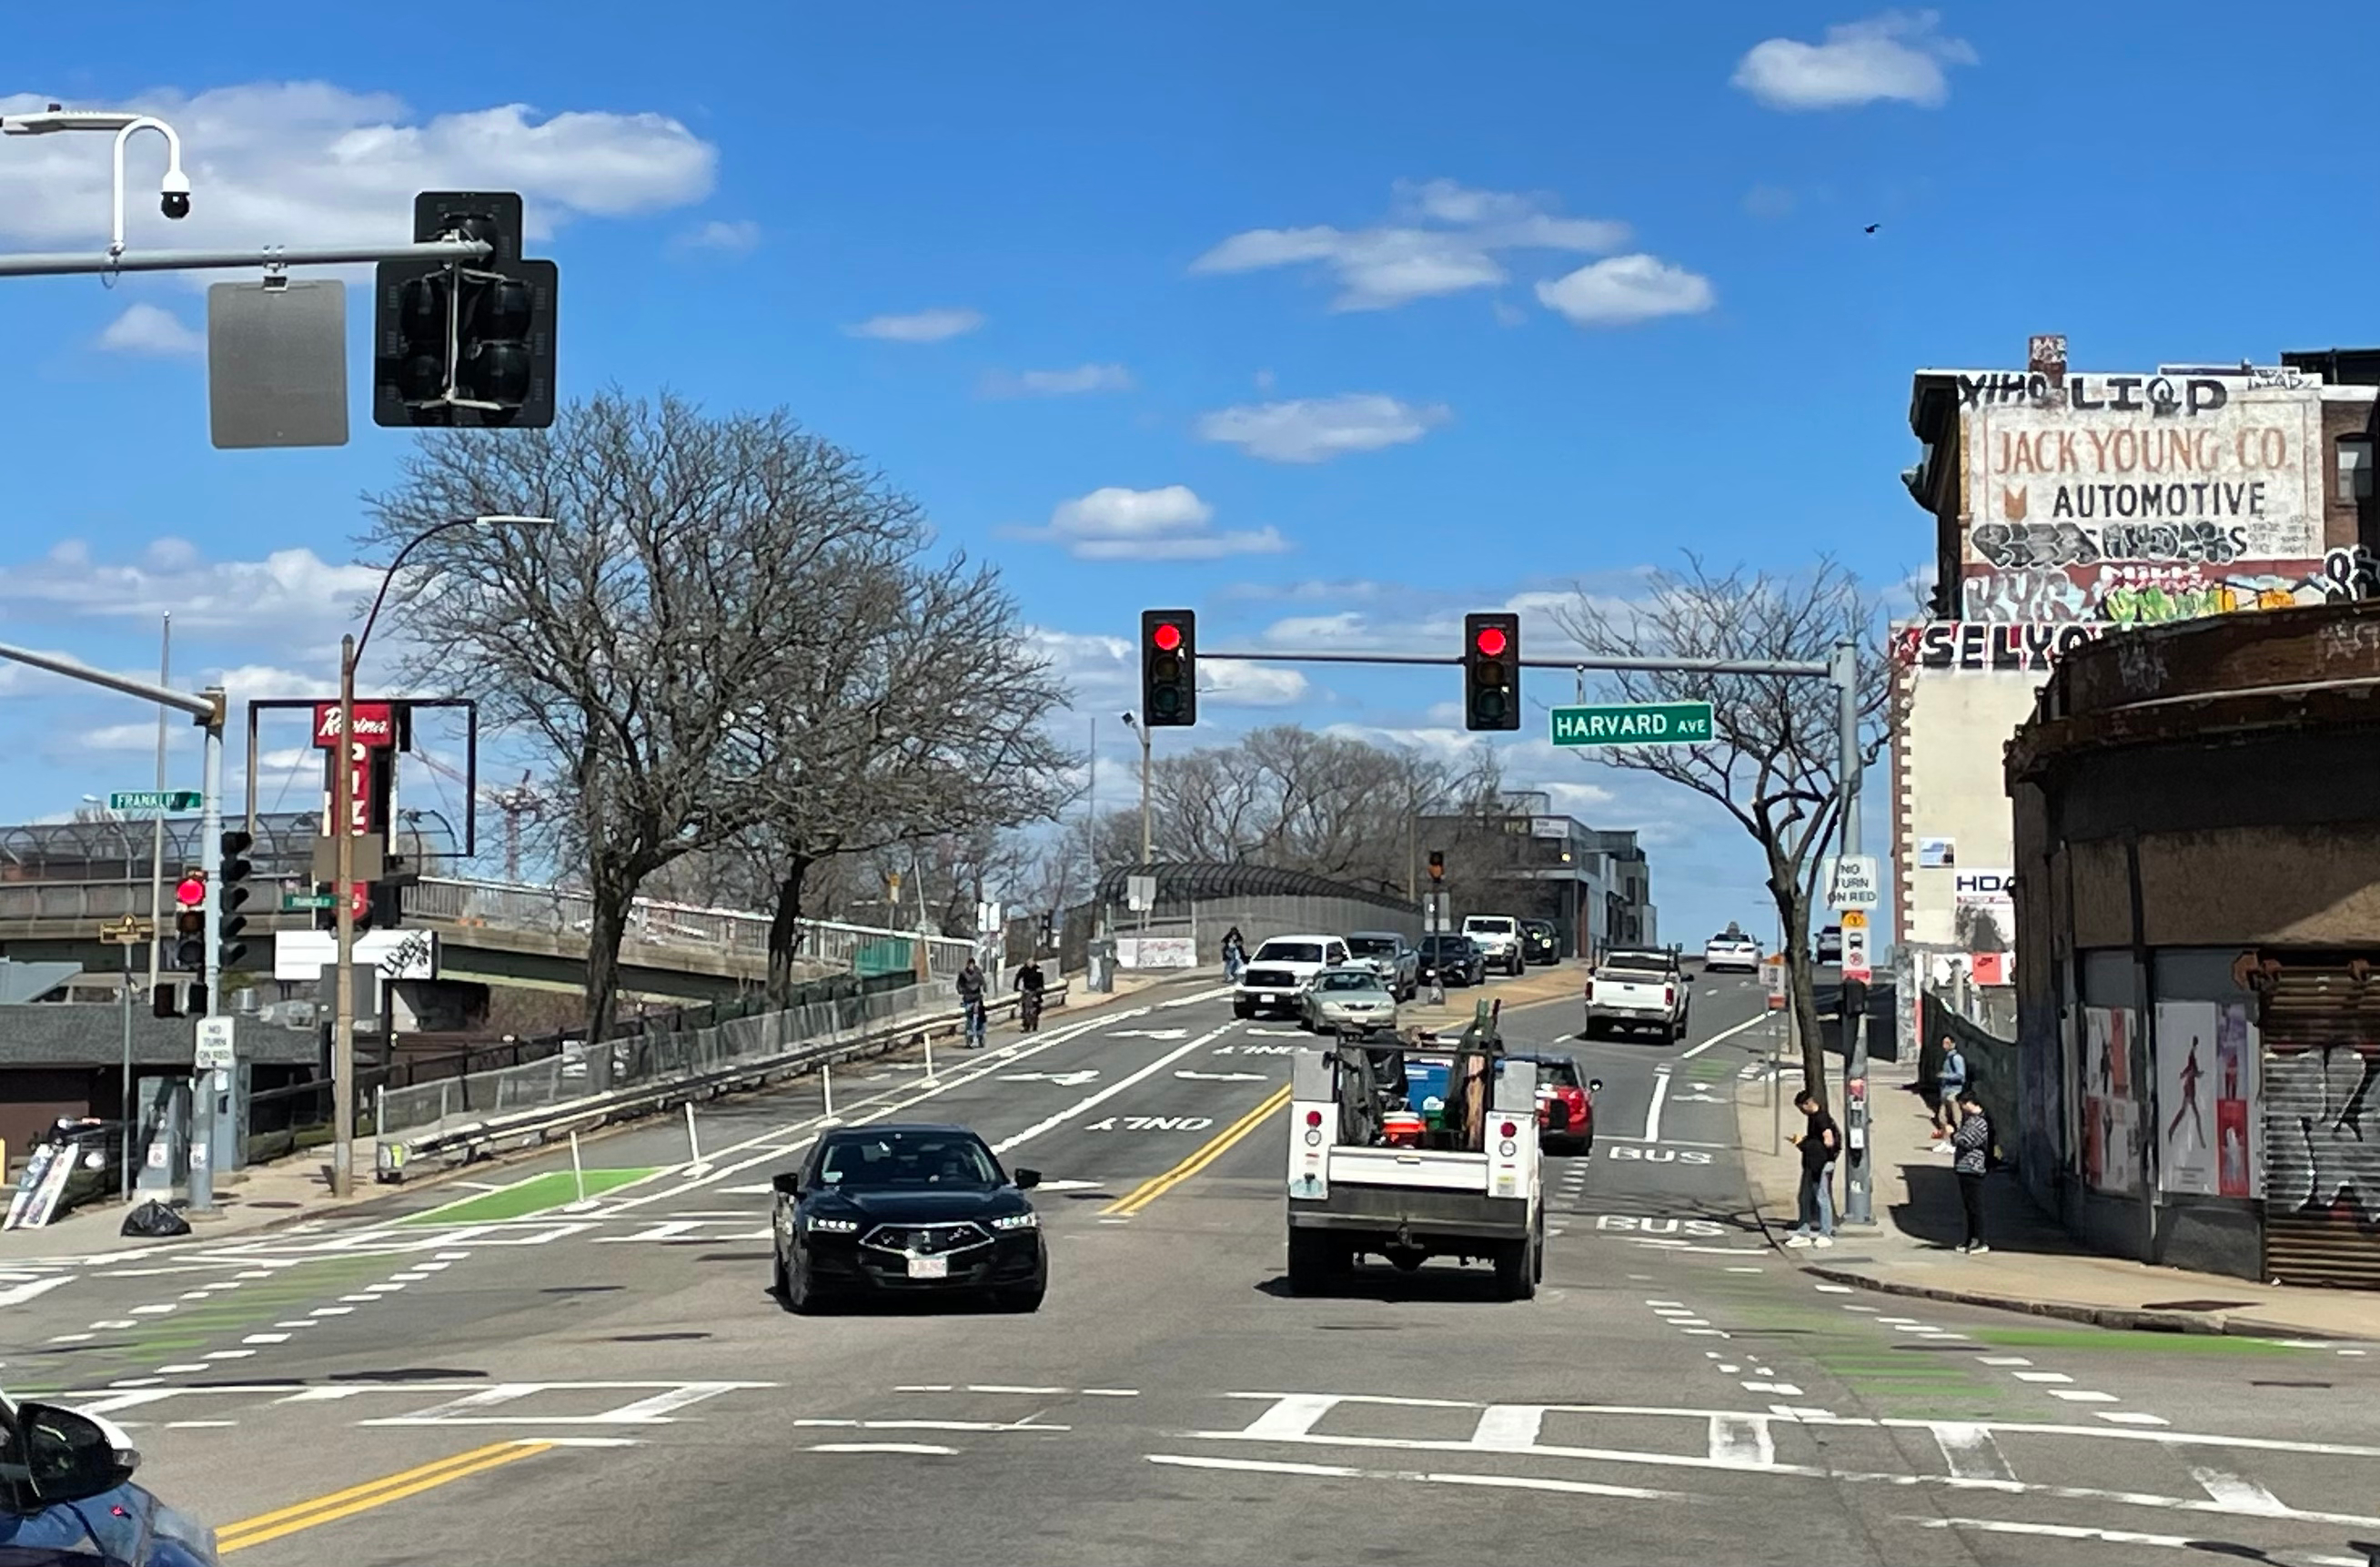 A view up a city street under blue skies. A street sign on a traffic light reads "Harvard Ave." Several people on bikes ride towards the camera in a bike lane near the left side of the photo.